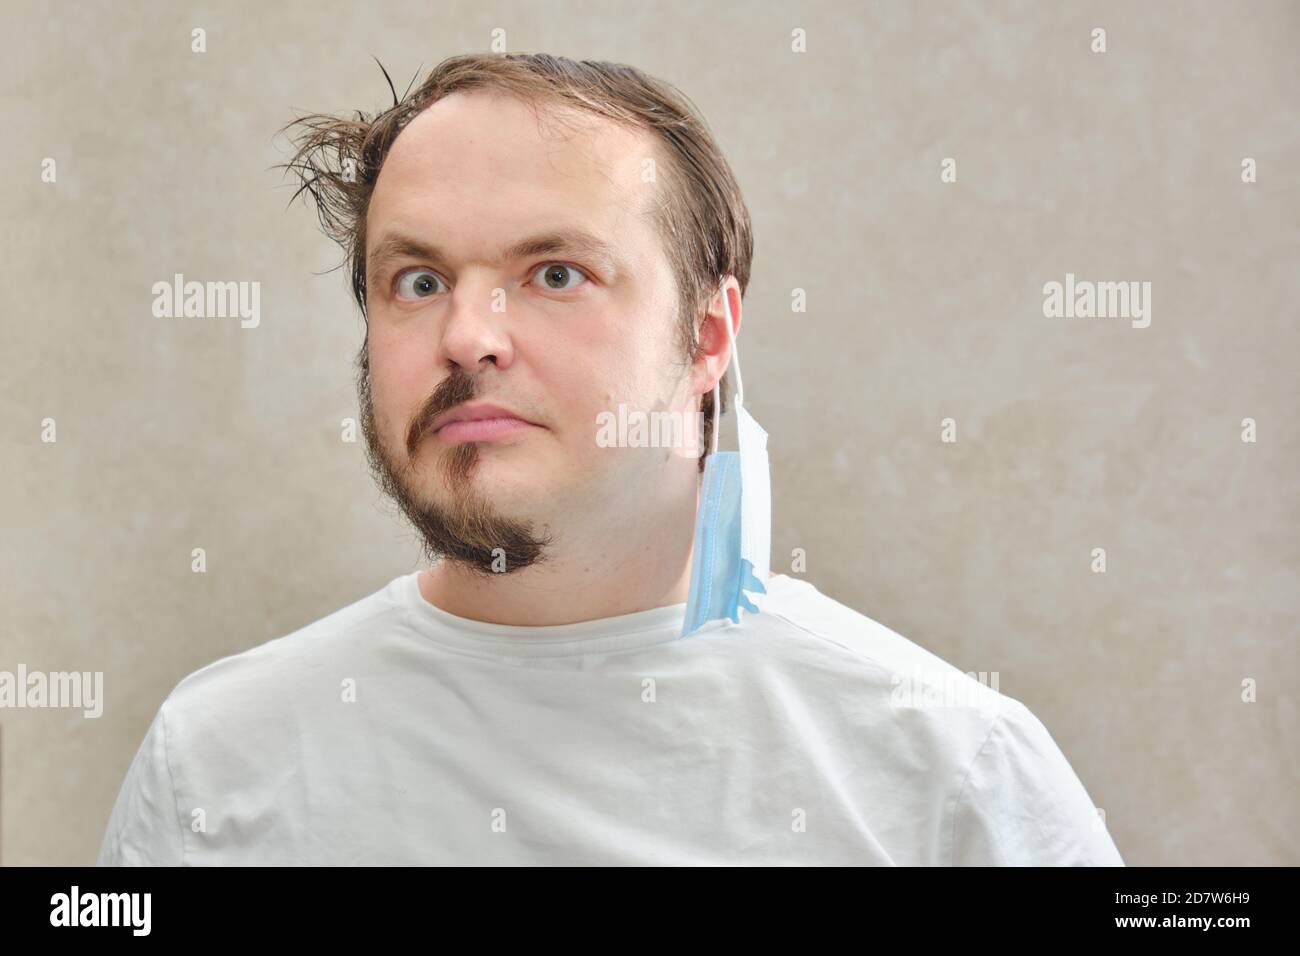 Adult man before and after the coronavirus epidemic, the concept of closed hairdressers and barbershops. Portrait of a man with a half-shaved beard an Stock Photo